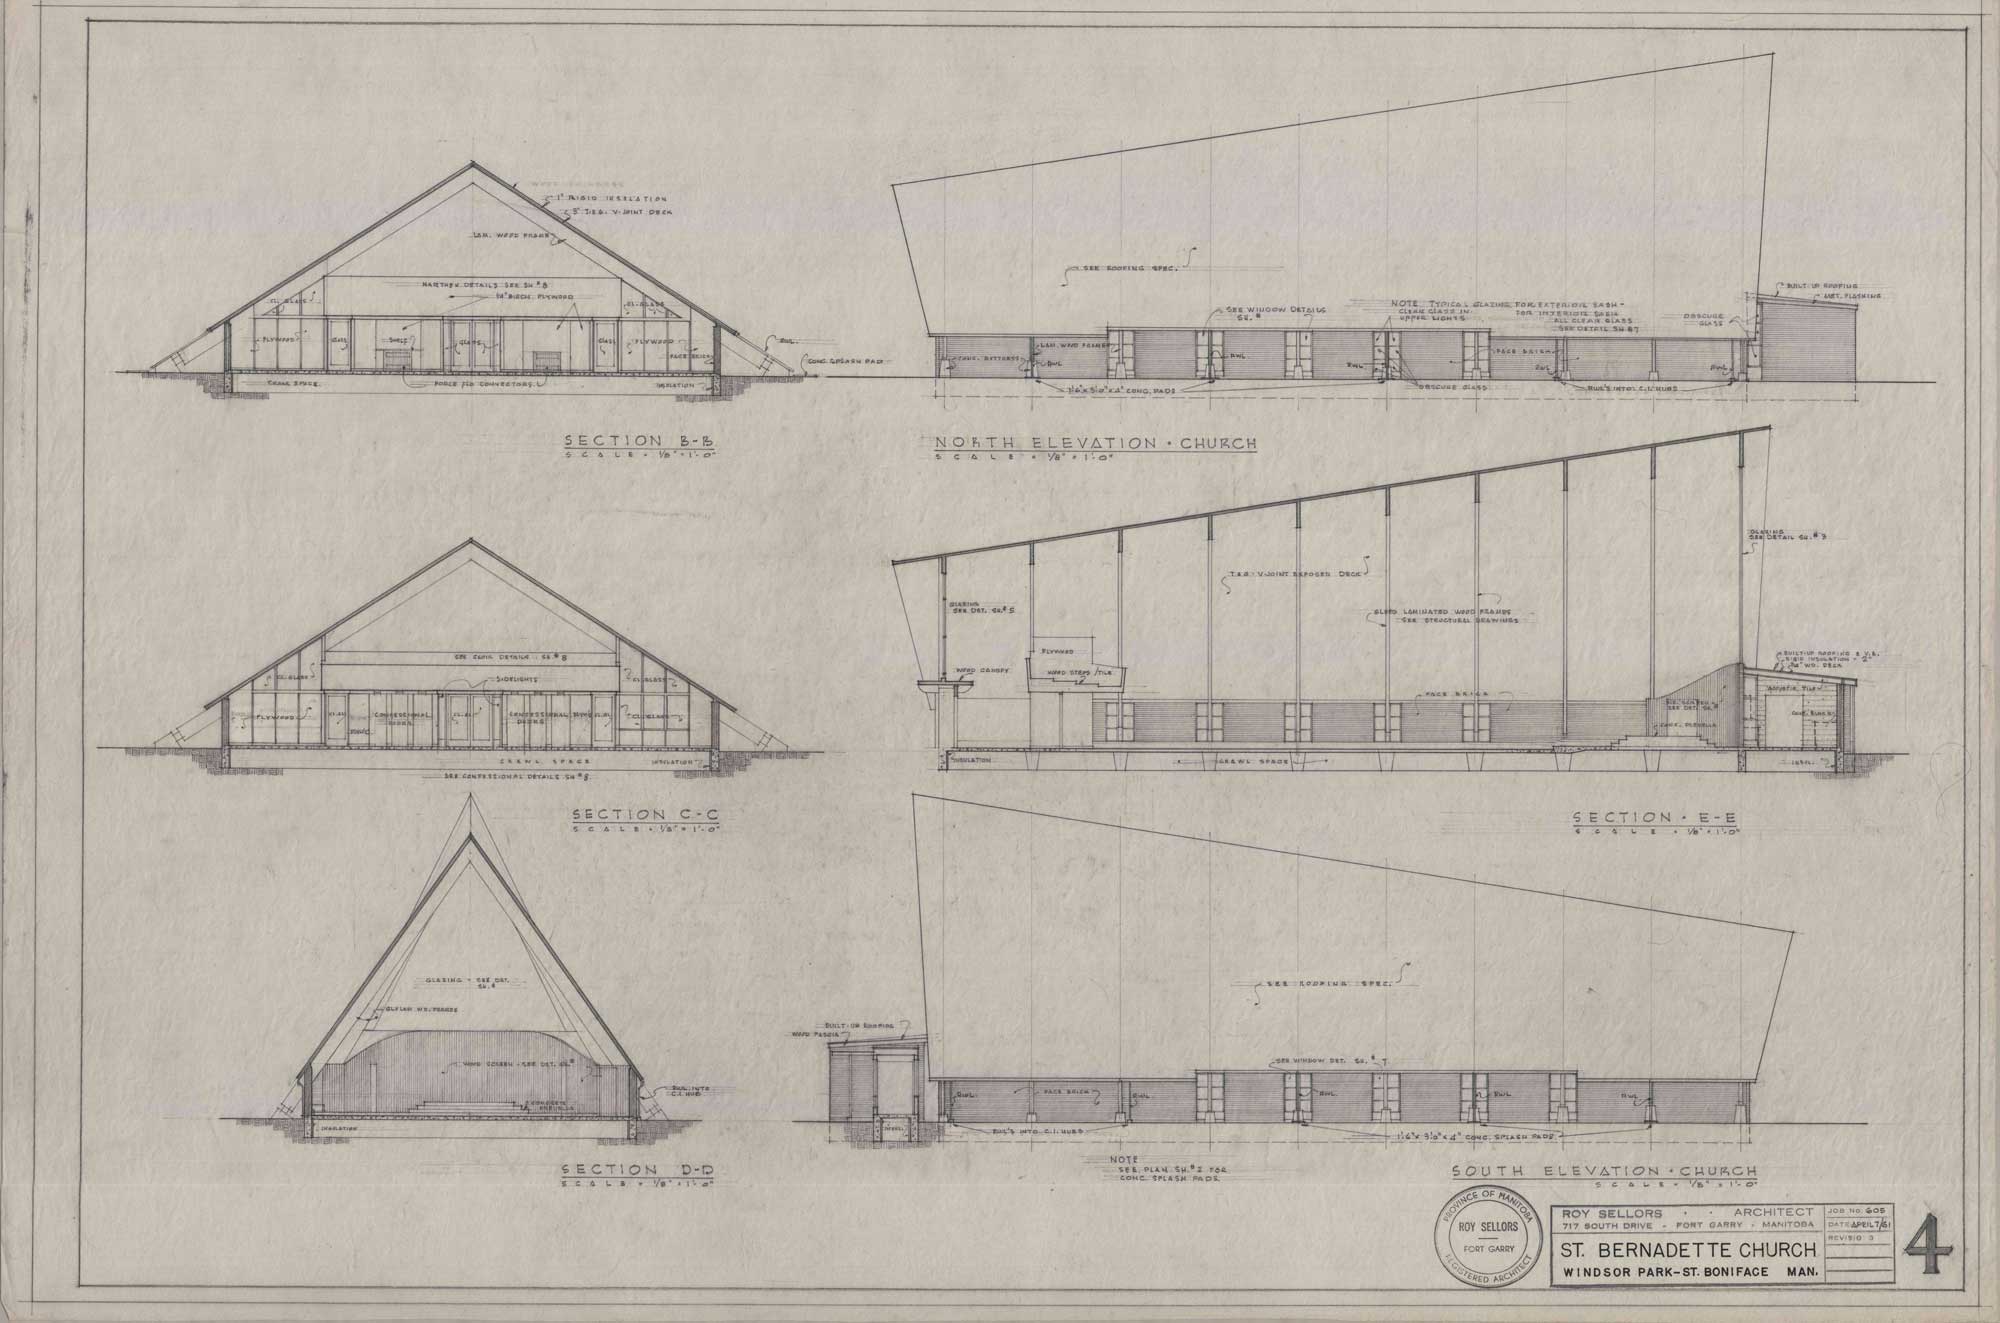 Image shows drawings of the north and south elevations for St. Bernadette Church. It shows the interior of the north and south sides of the church.